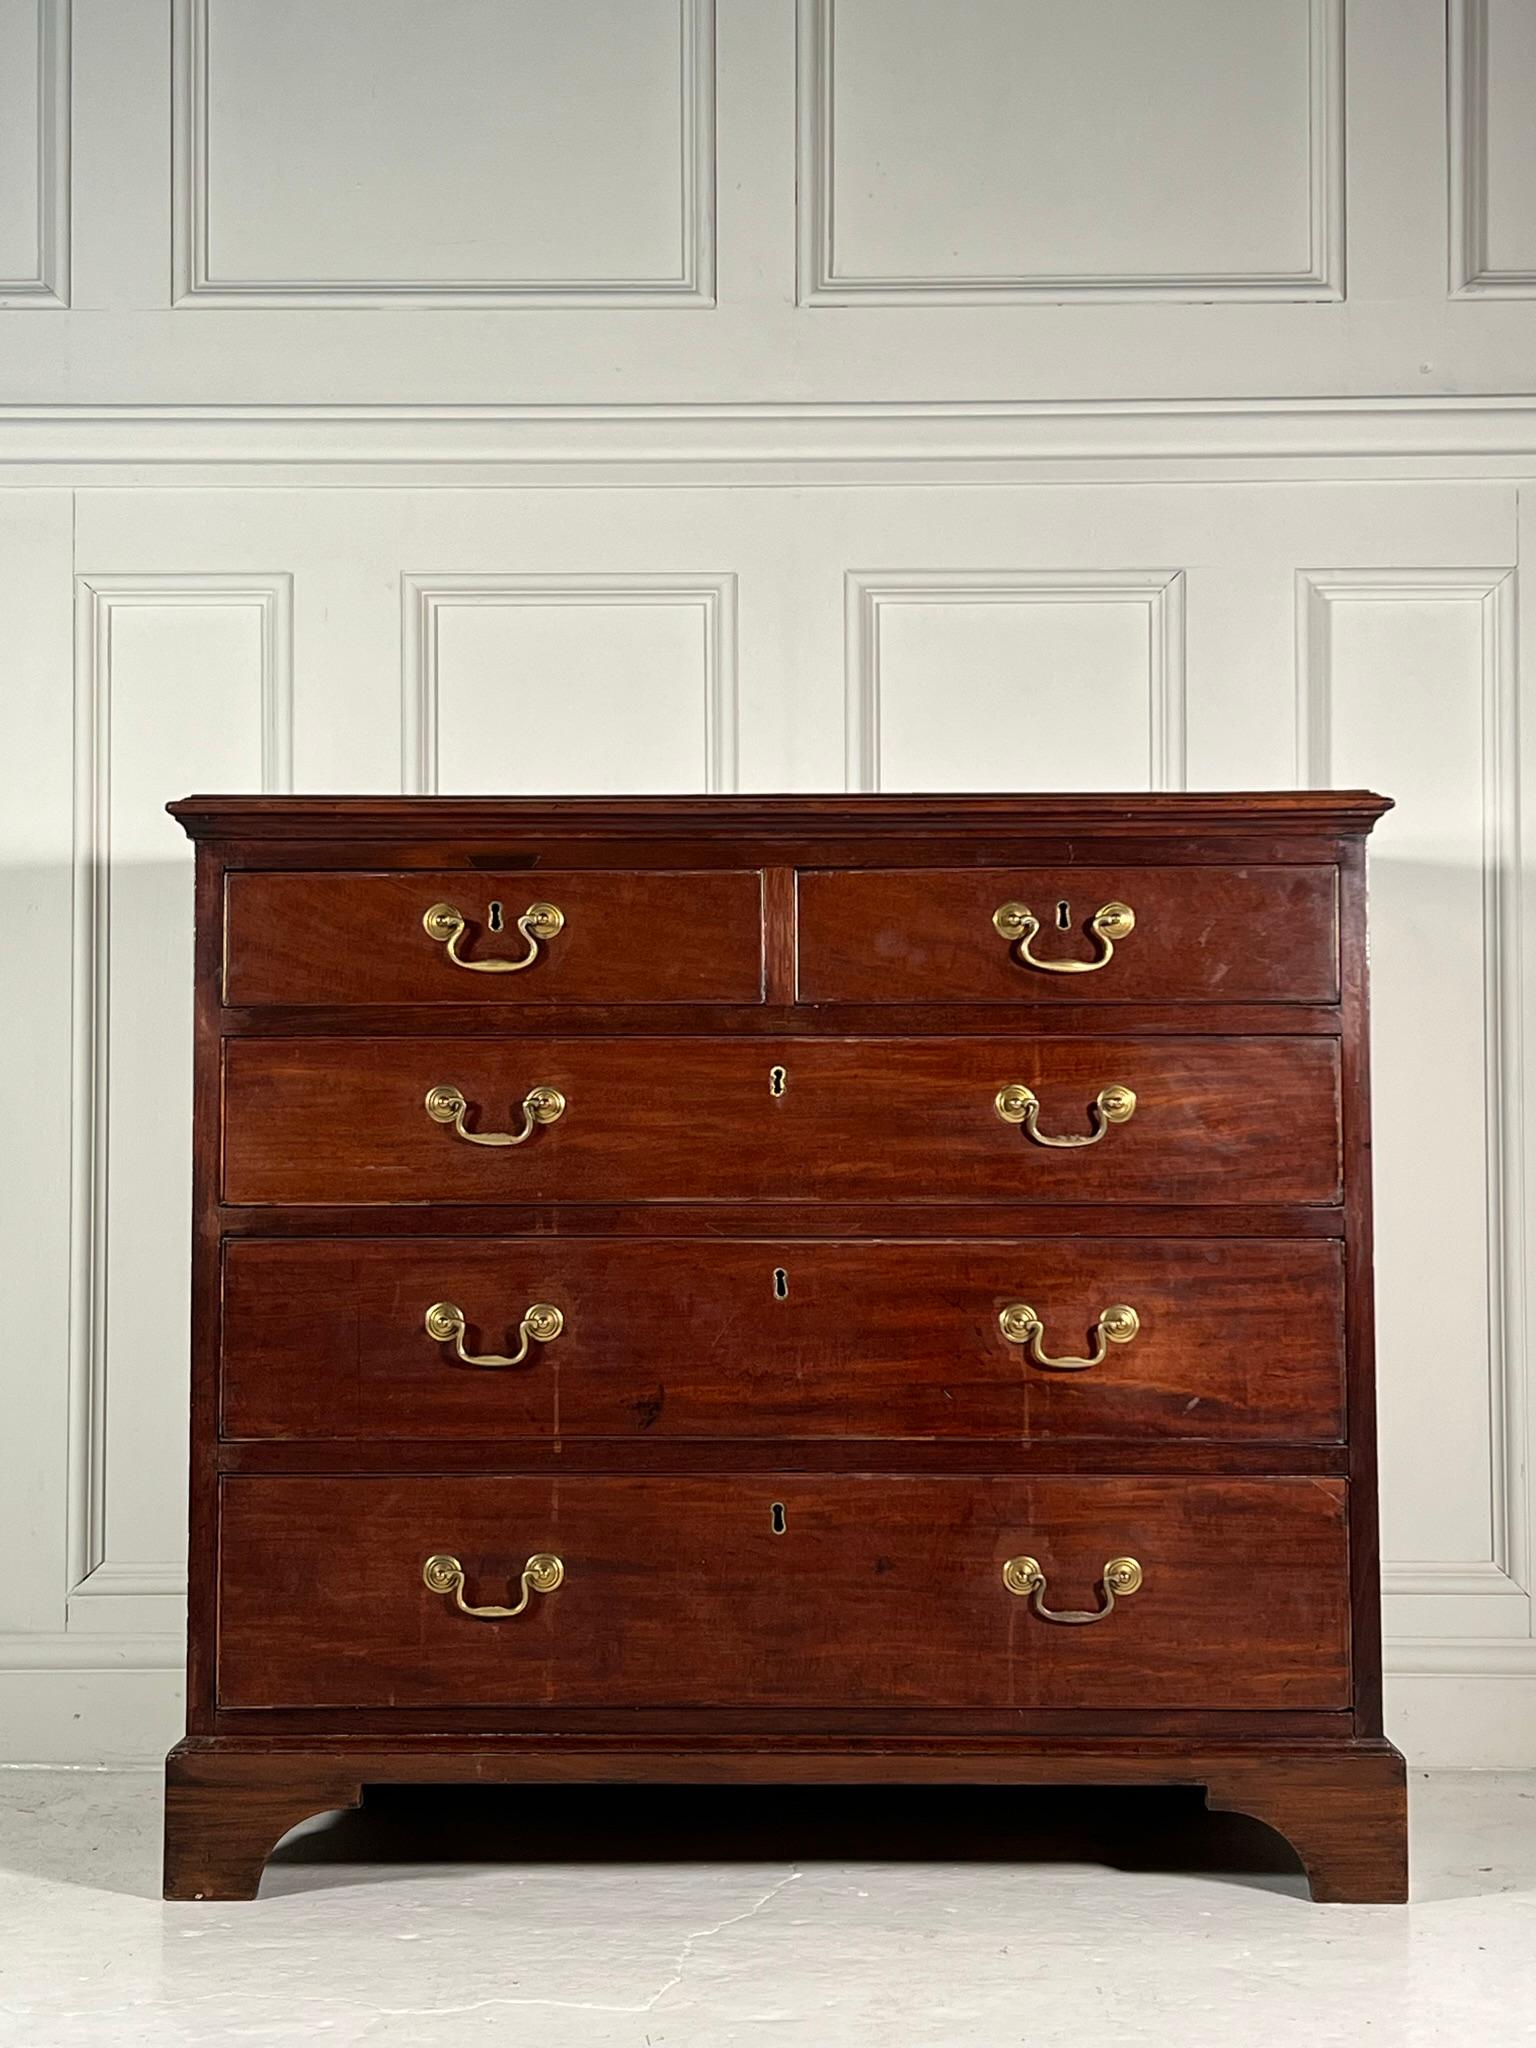 Late 19th Century Georgian Revival Chest of Drawers In Good Condition For Sale In Warrington, GB